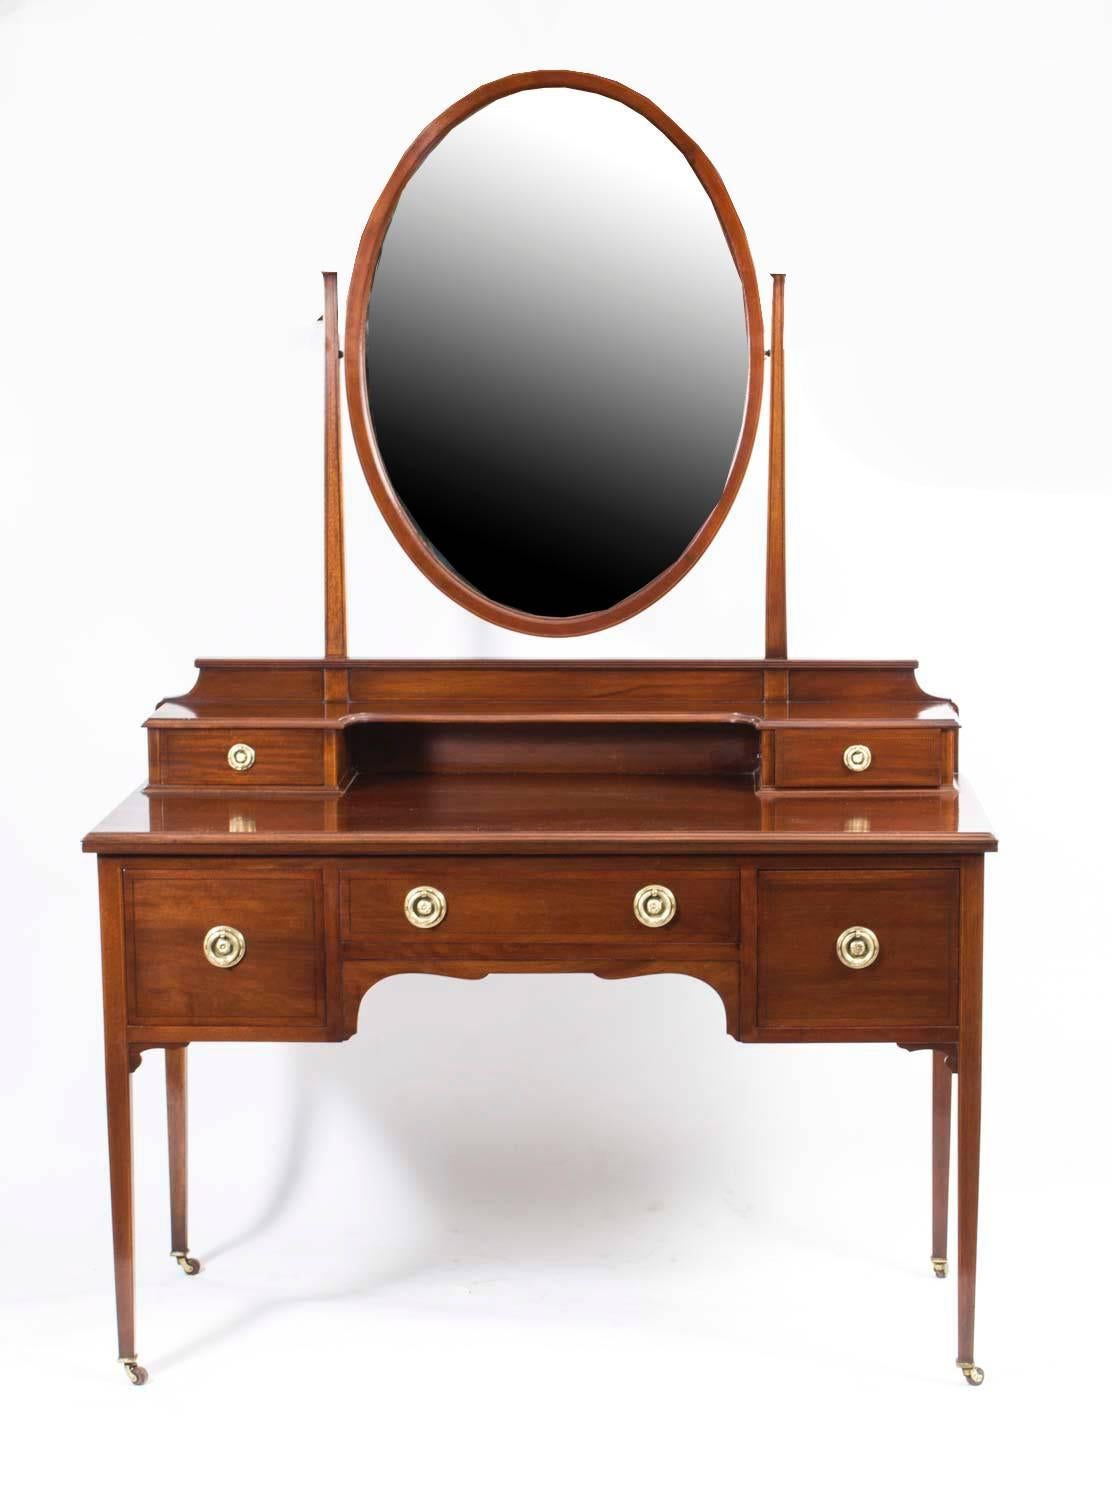 This is a totally fabulous antique inlaid mahogany dressing table with adjustable mirror, circa 1900 in date.

The top surmounted by an oval shaped mirror with square column supports. It has two small trinket drawers below the mirror, over three